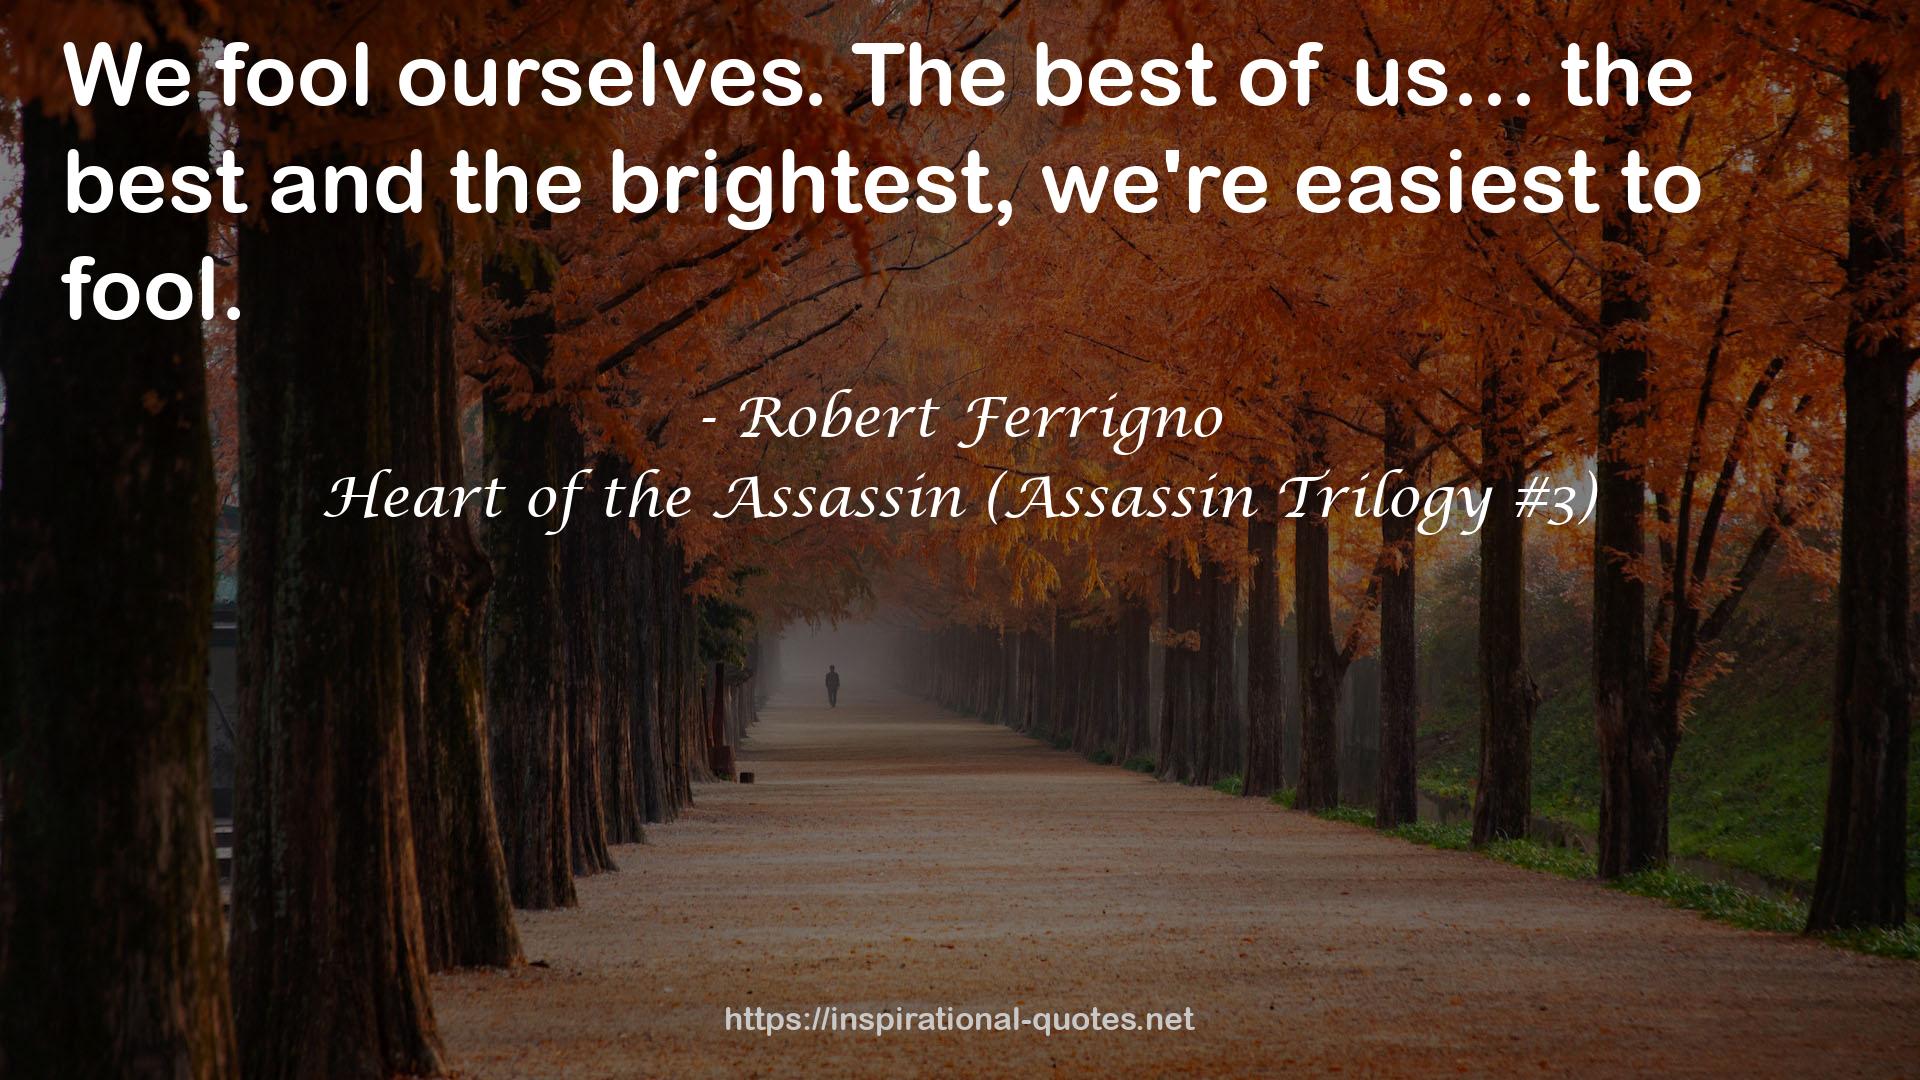 Heart of the Assassin (Assassin Trilogy #3) QUOTES